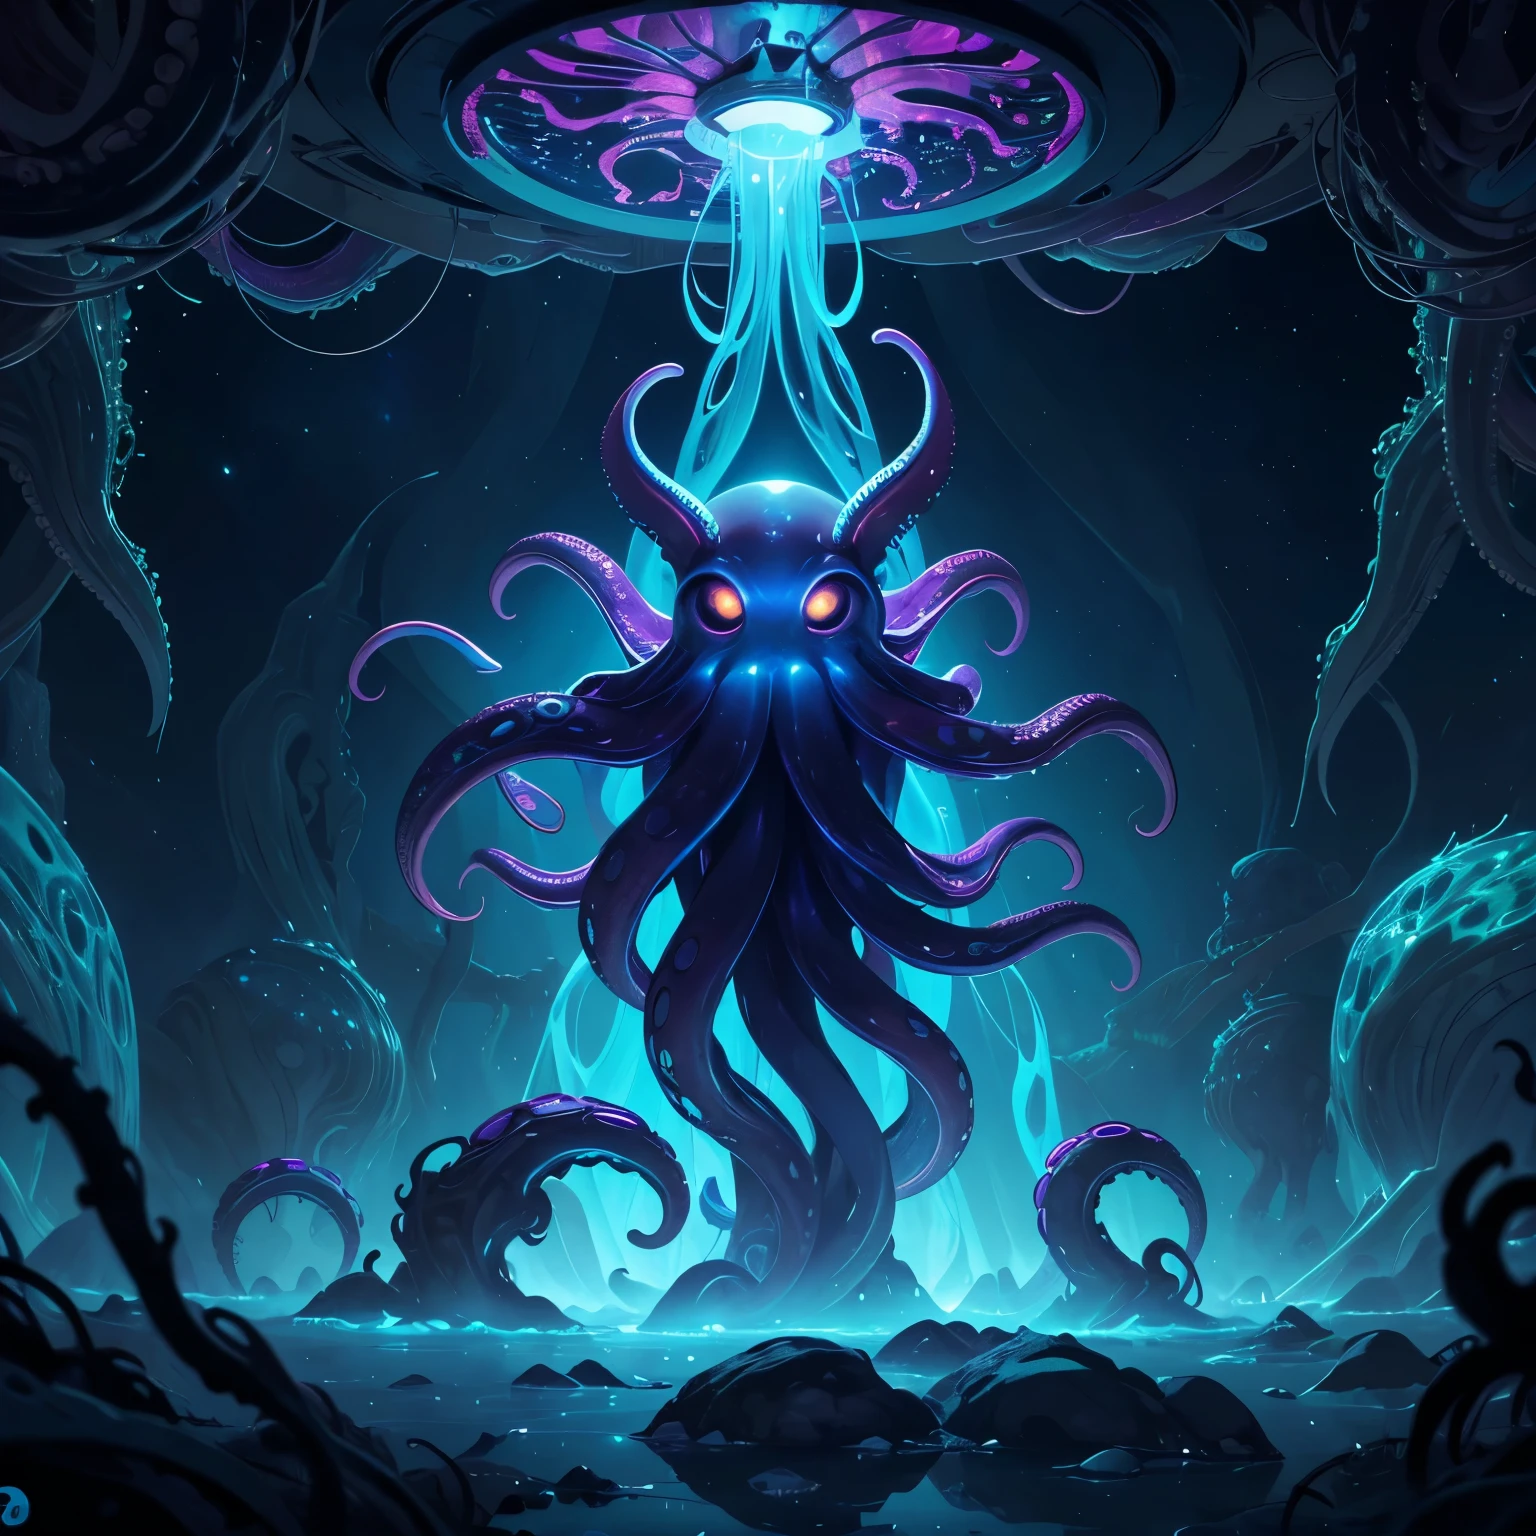 ((Alien octopi)), ((multiple octopi)),floating in space,enchanting cosmic scene,ethereal glow,colorful nebulae,hypnotic tentacles,dazzling bioluminescence, intricate details,mystical creatures,evoking otherworldly mystery,(extraterrestrial cephalopods),interstellar tranquility,(best quality,4k,8k,highres,masterpiece:1.2),ultra-detailed,alien anatomy,glowing eyes,translucent skin,graceful movement,mesmerizing patterns,deep space exploration,aquatic wonders in the cosmos,objets d'art,unearthly beauty and grace,alien intelligence revealed,cosmic enigma unveiled,mind-bending artistry